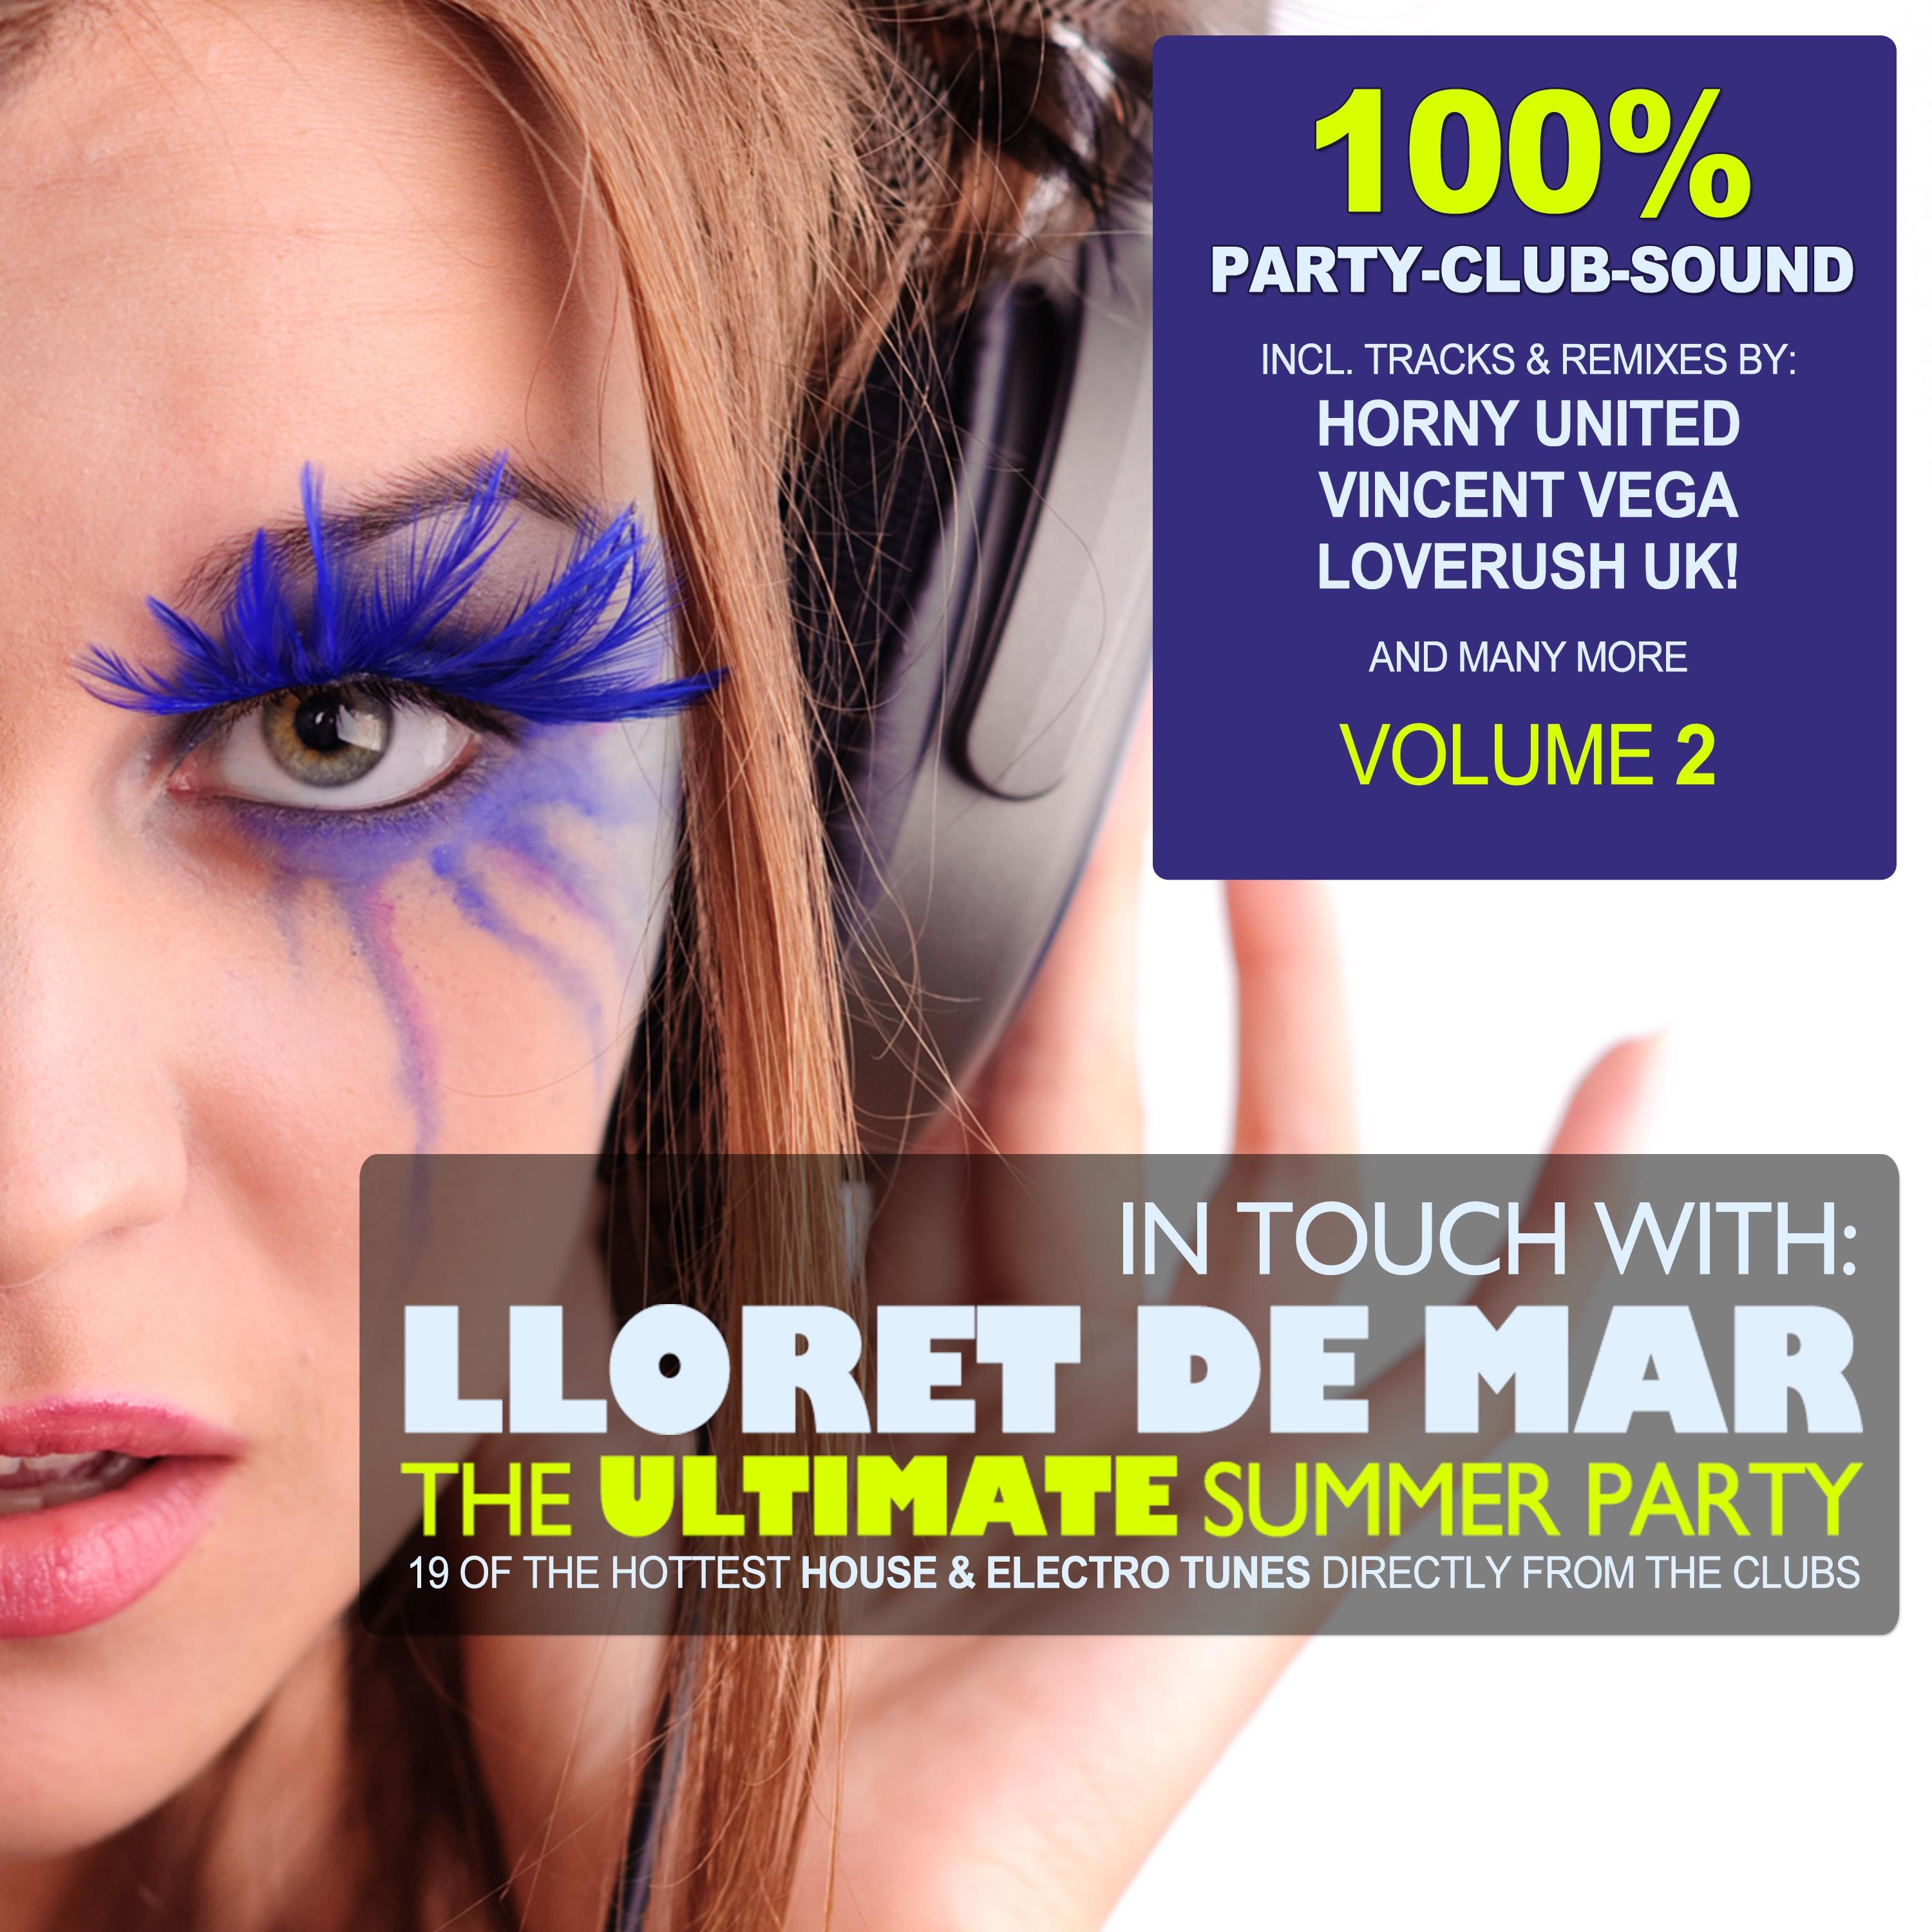 In Touch With: Lloret de Mar - The Ultimate Summer Party, Vol. 2